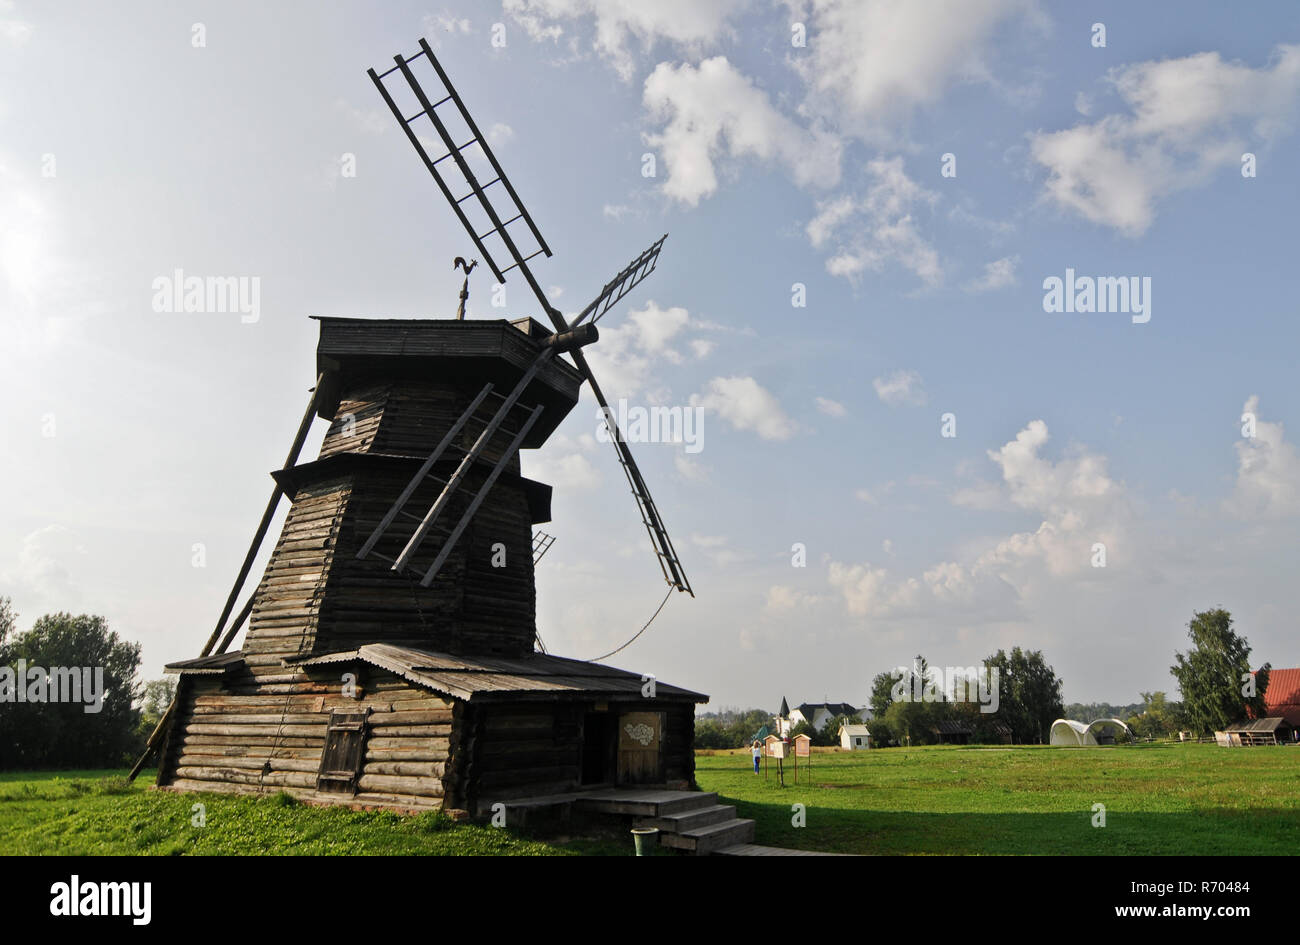 Museum of Wooden Architecture and Peasant Life - Ancient wooden windmill. Suzdal, Russia Stock Photo